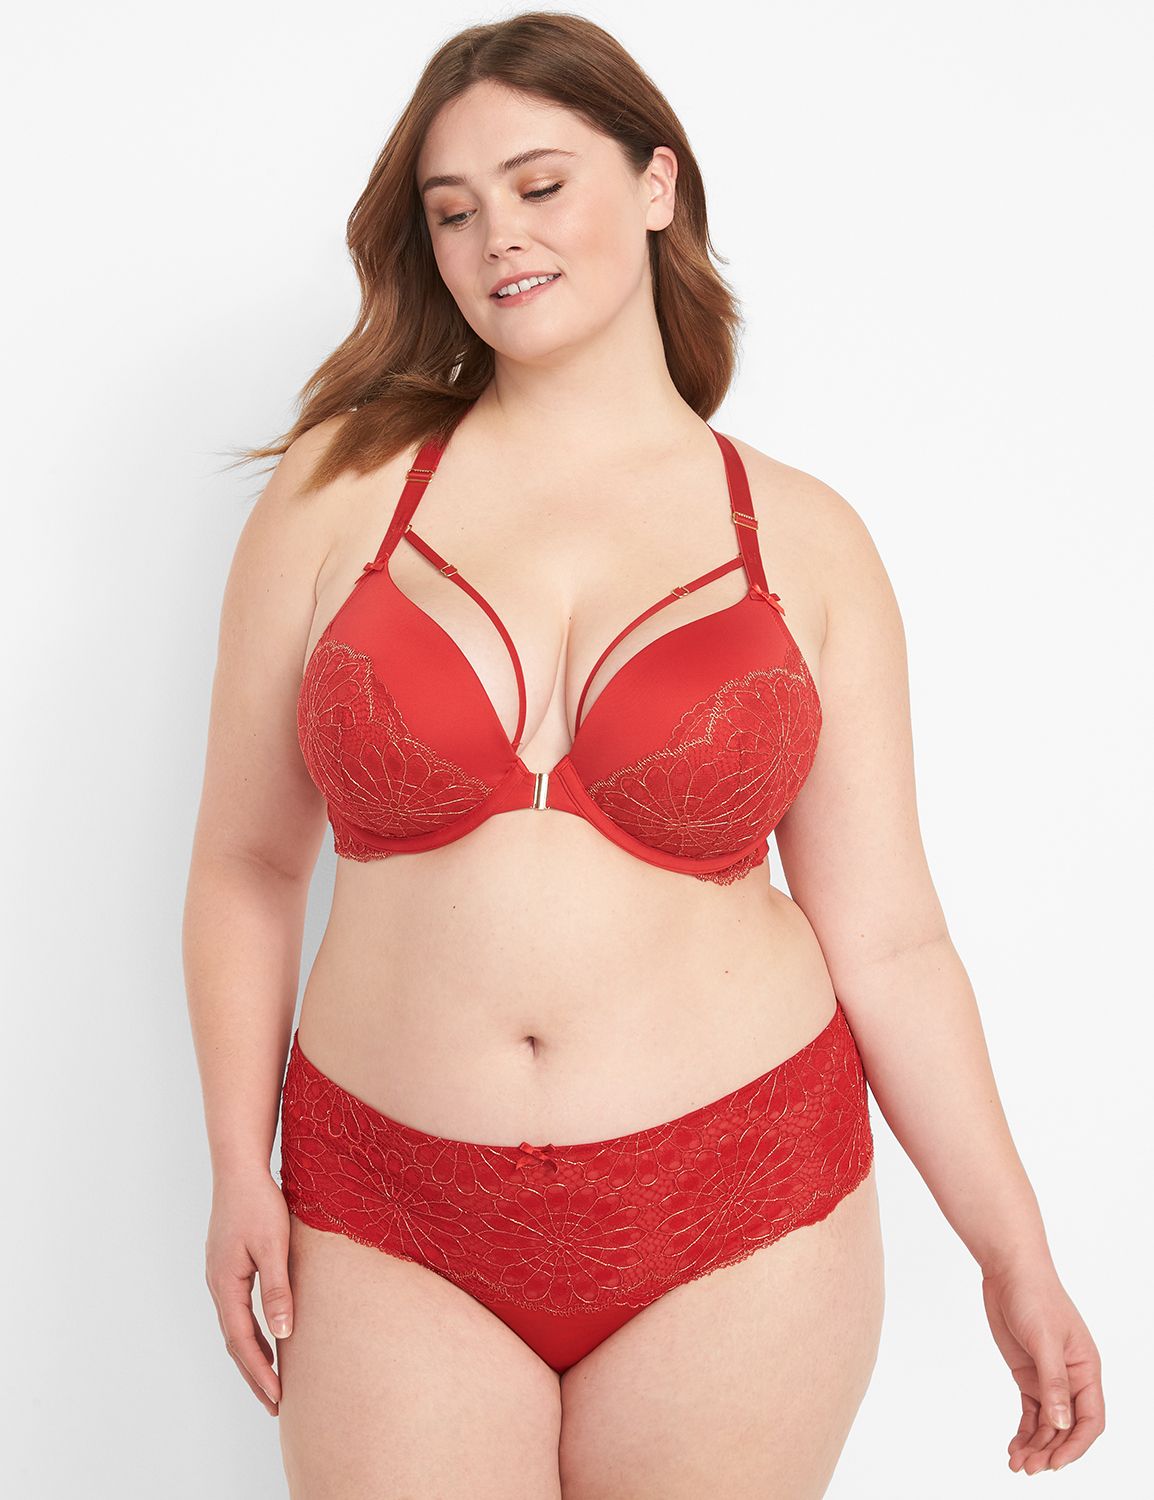 CACIQUE LANE BRYANT Lace Boost Plunge Bra Size 38F In Red $29.00